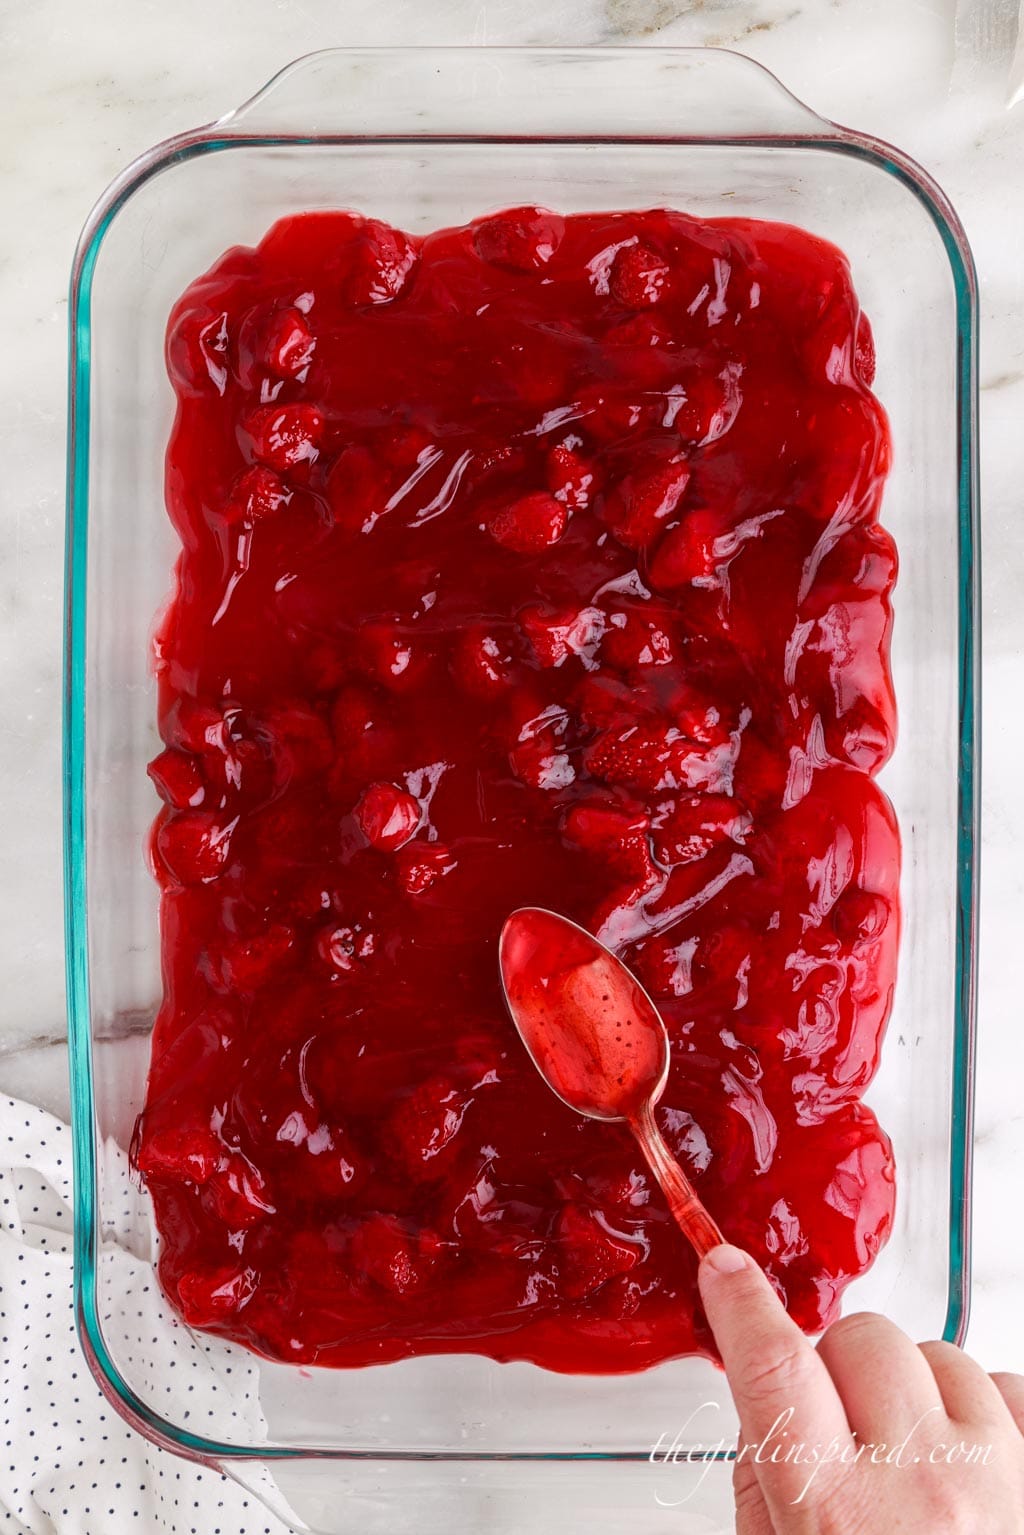 Strawberry pie filling spread into a baking dish, atop a white marble surface